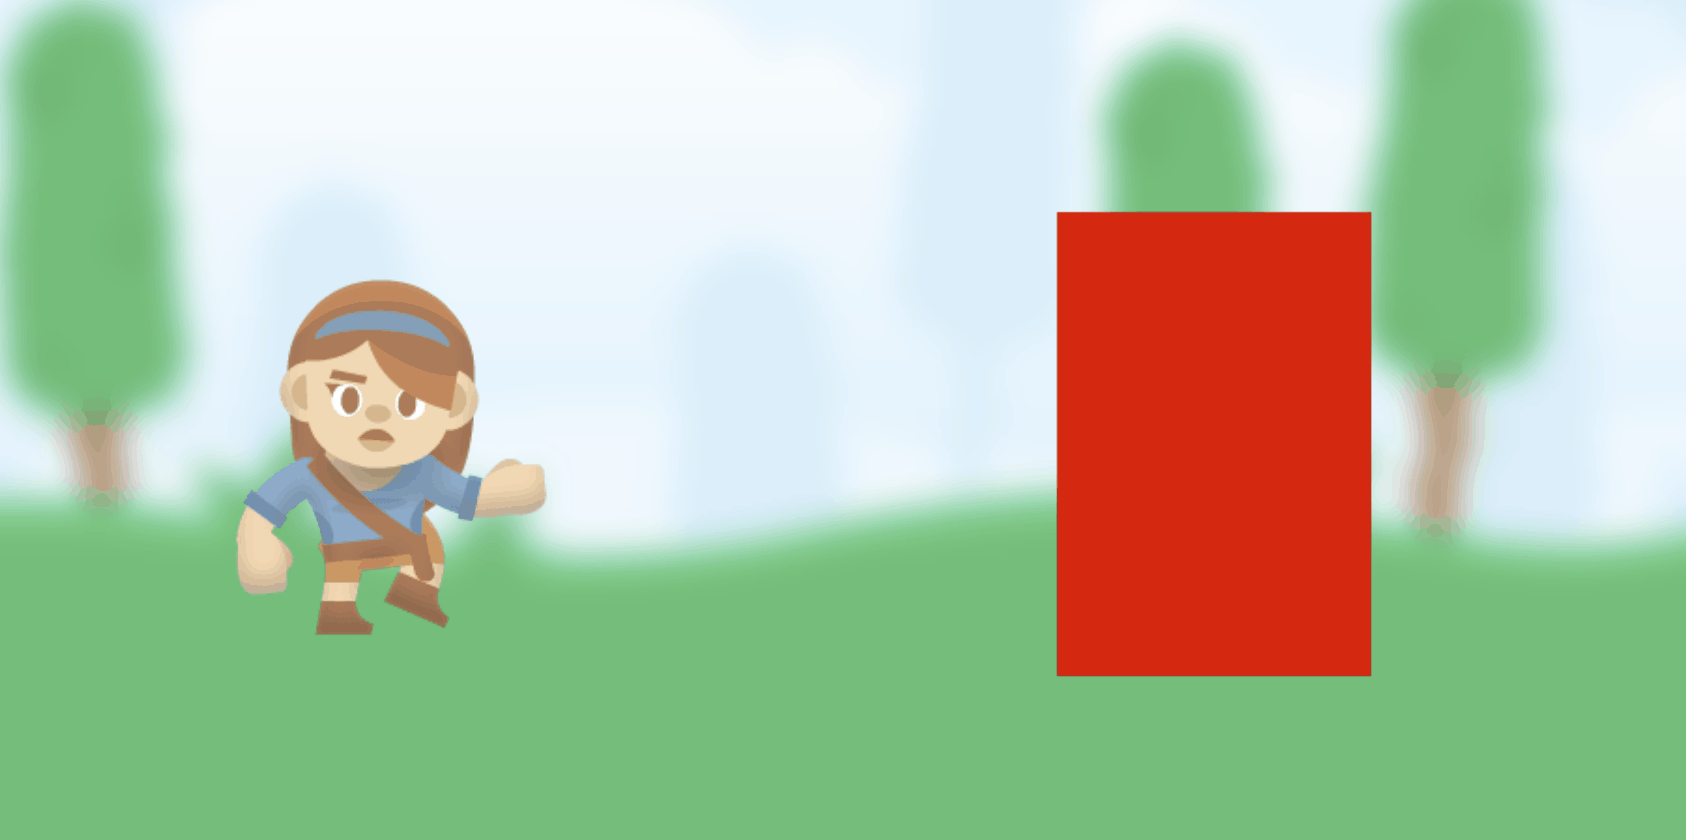 A girl running on the spot next to a solid red rectangle.